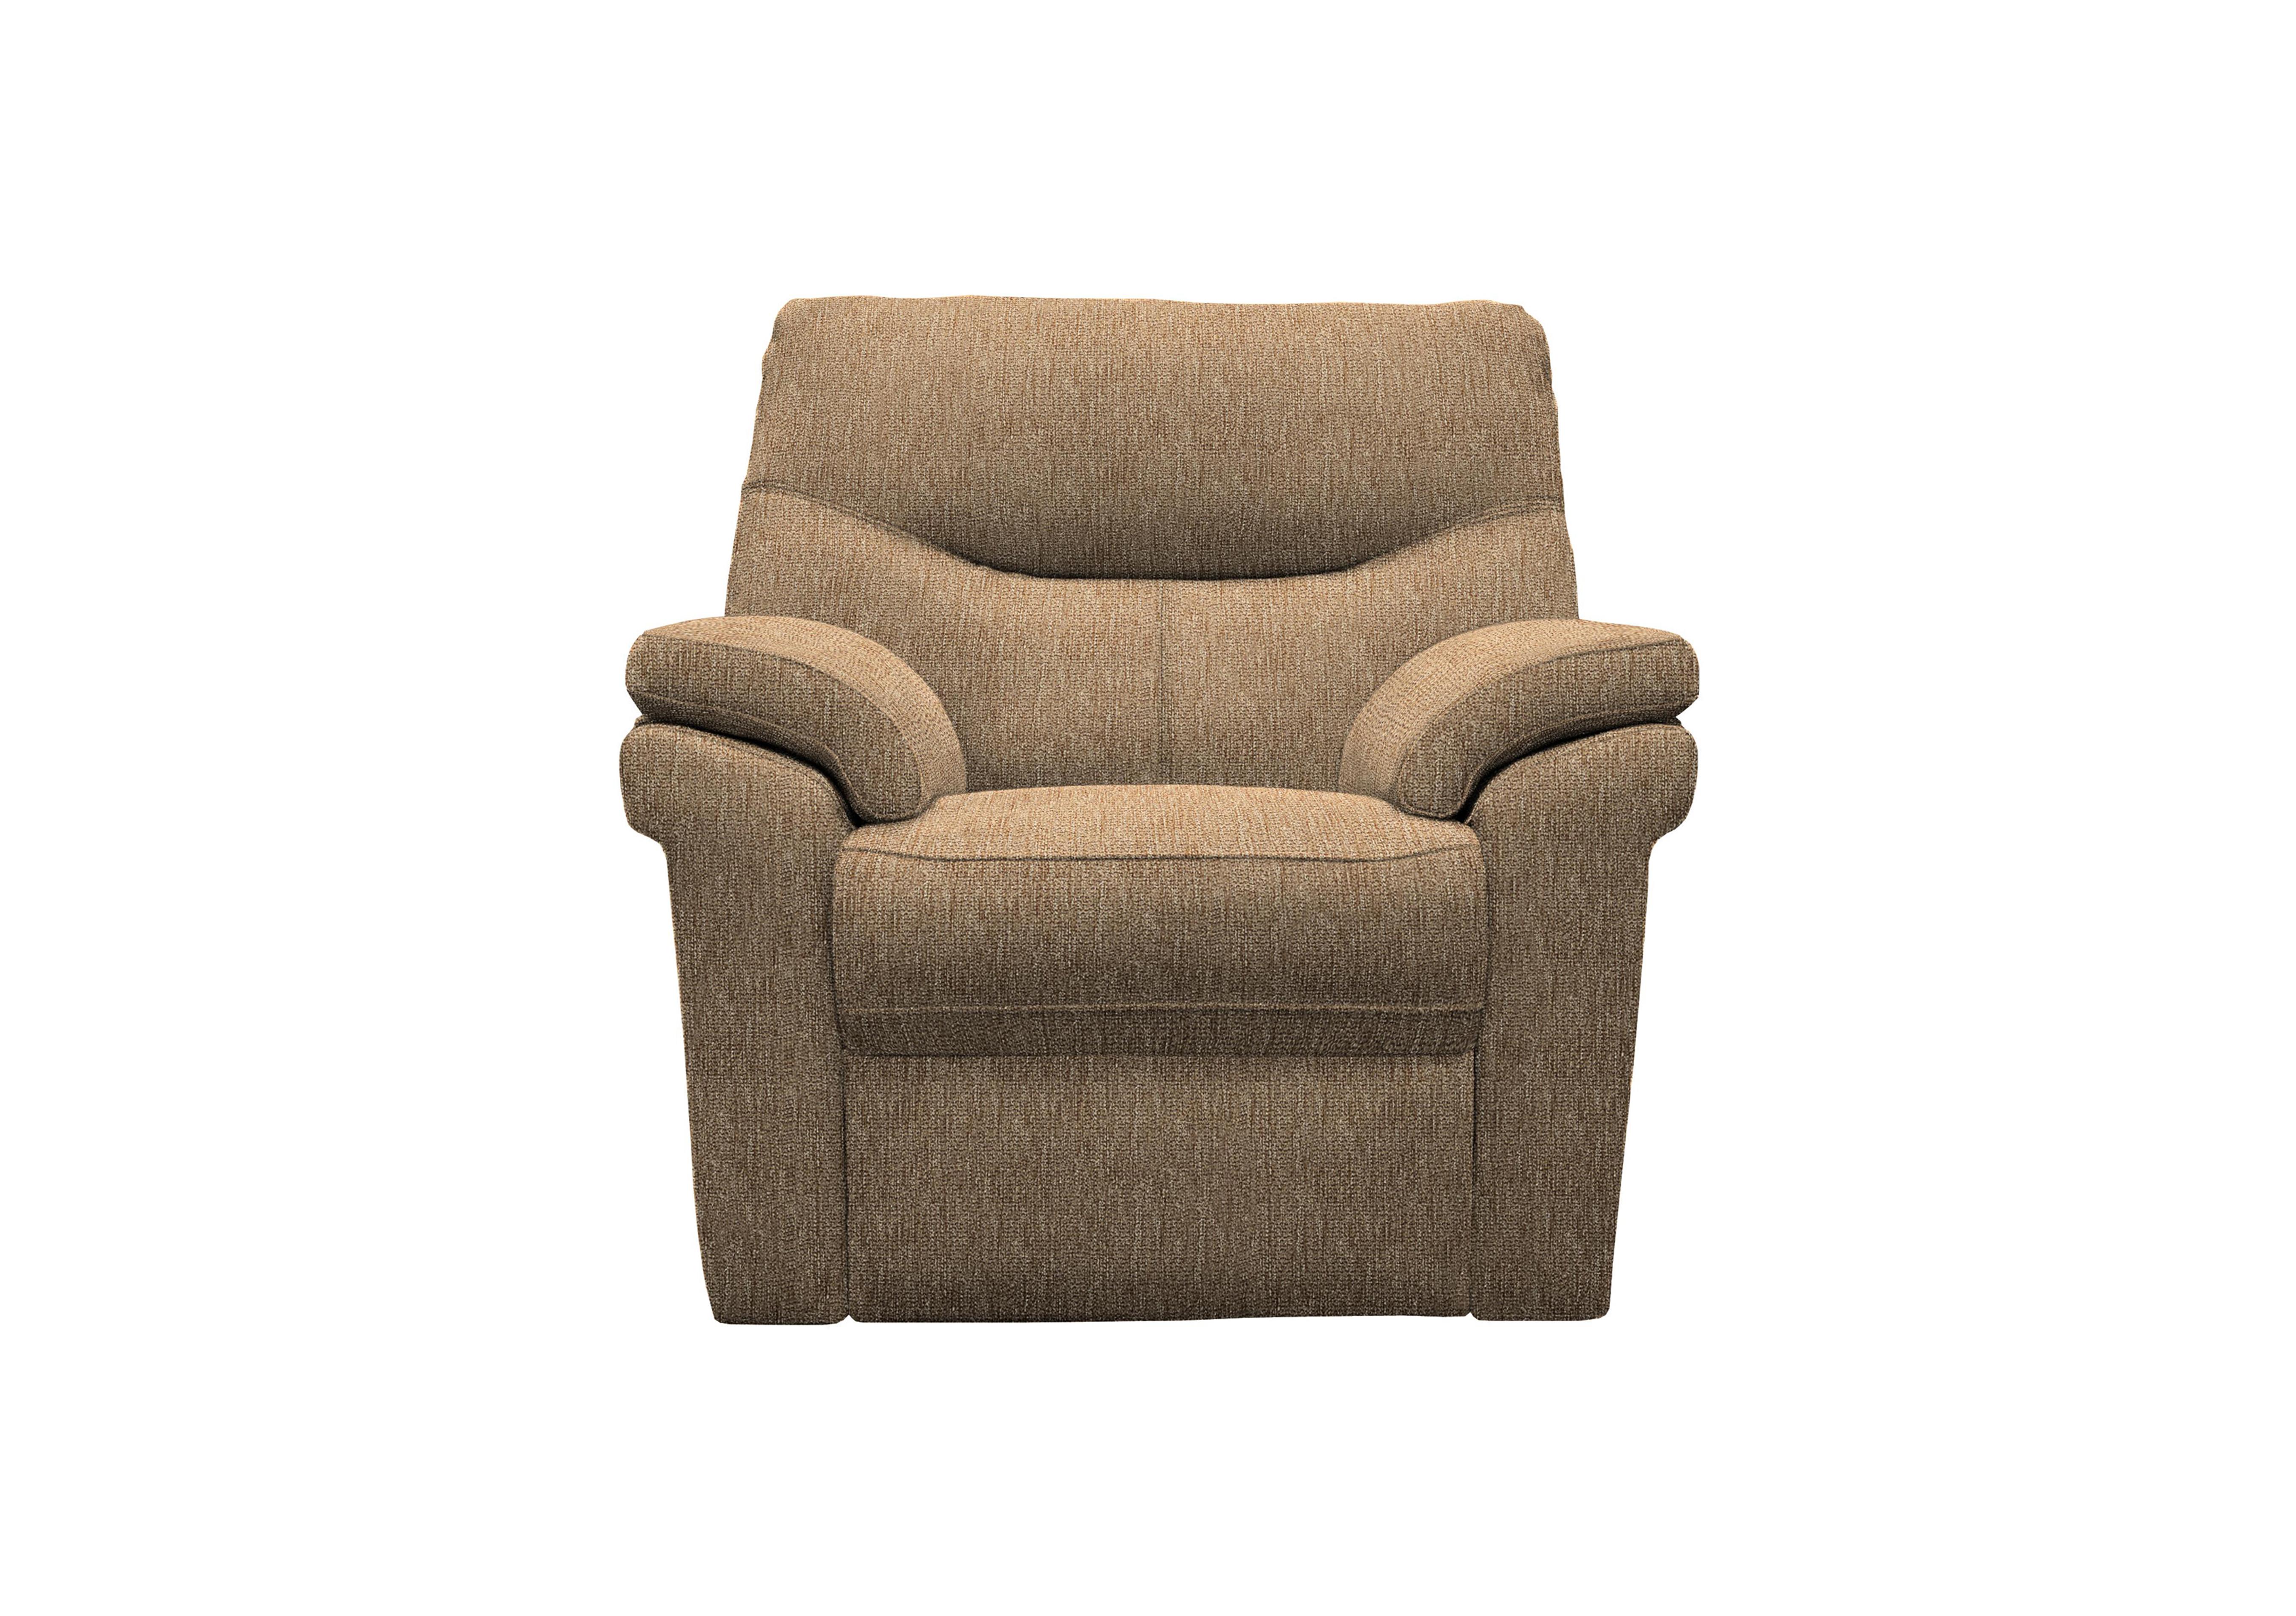 Seattle Fabric Armchair in A070 Boucle Cocoa on Furniture Village